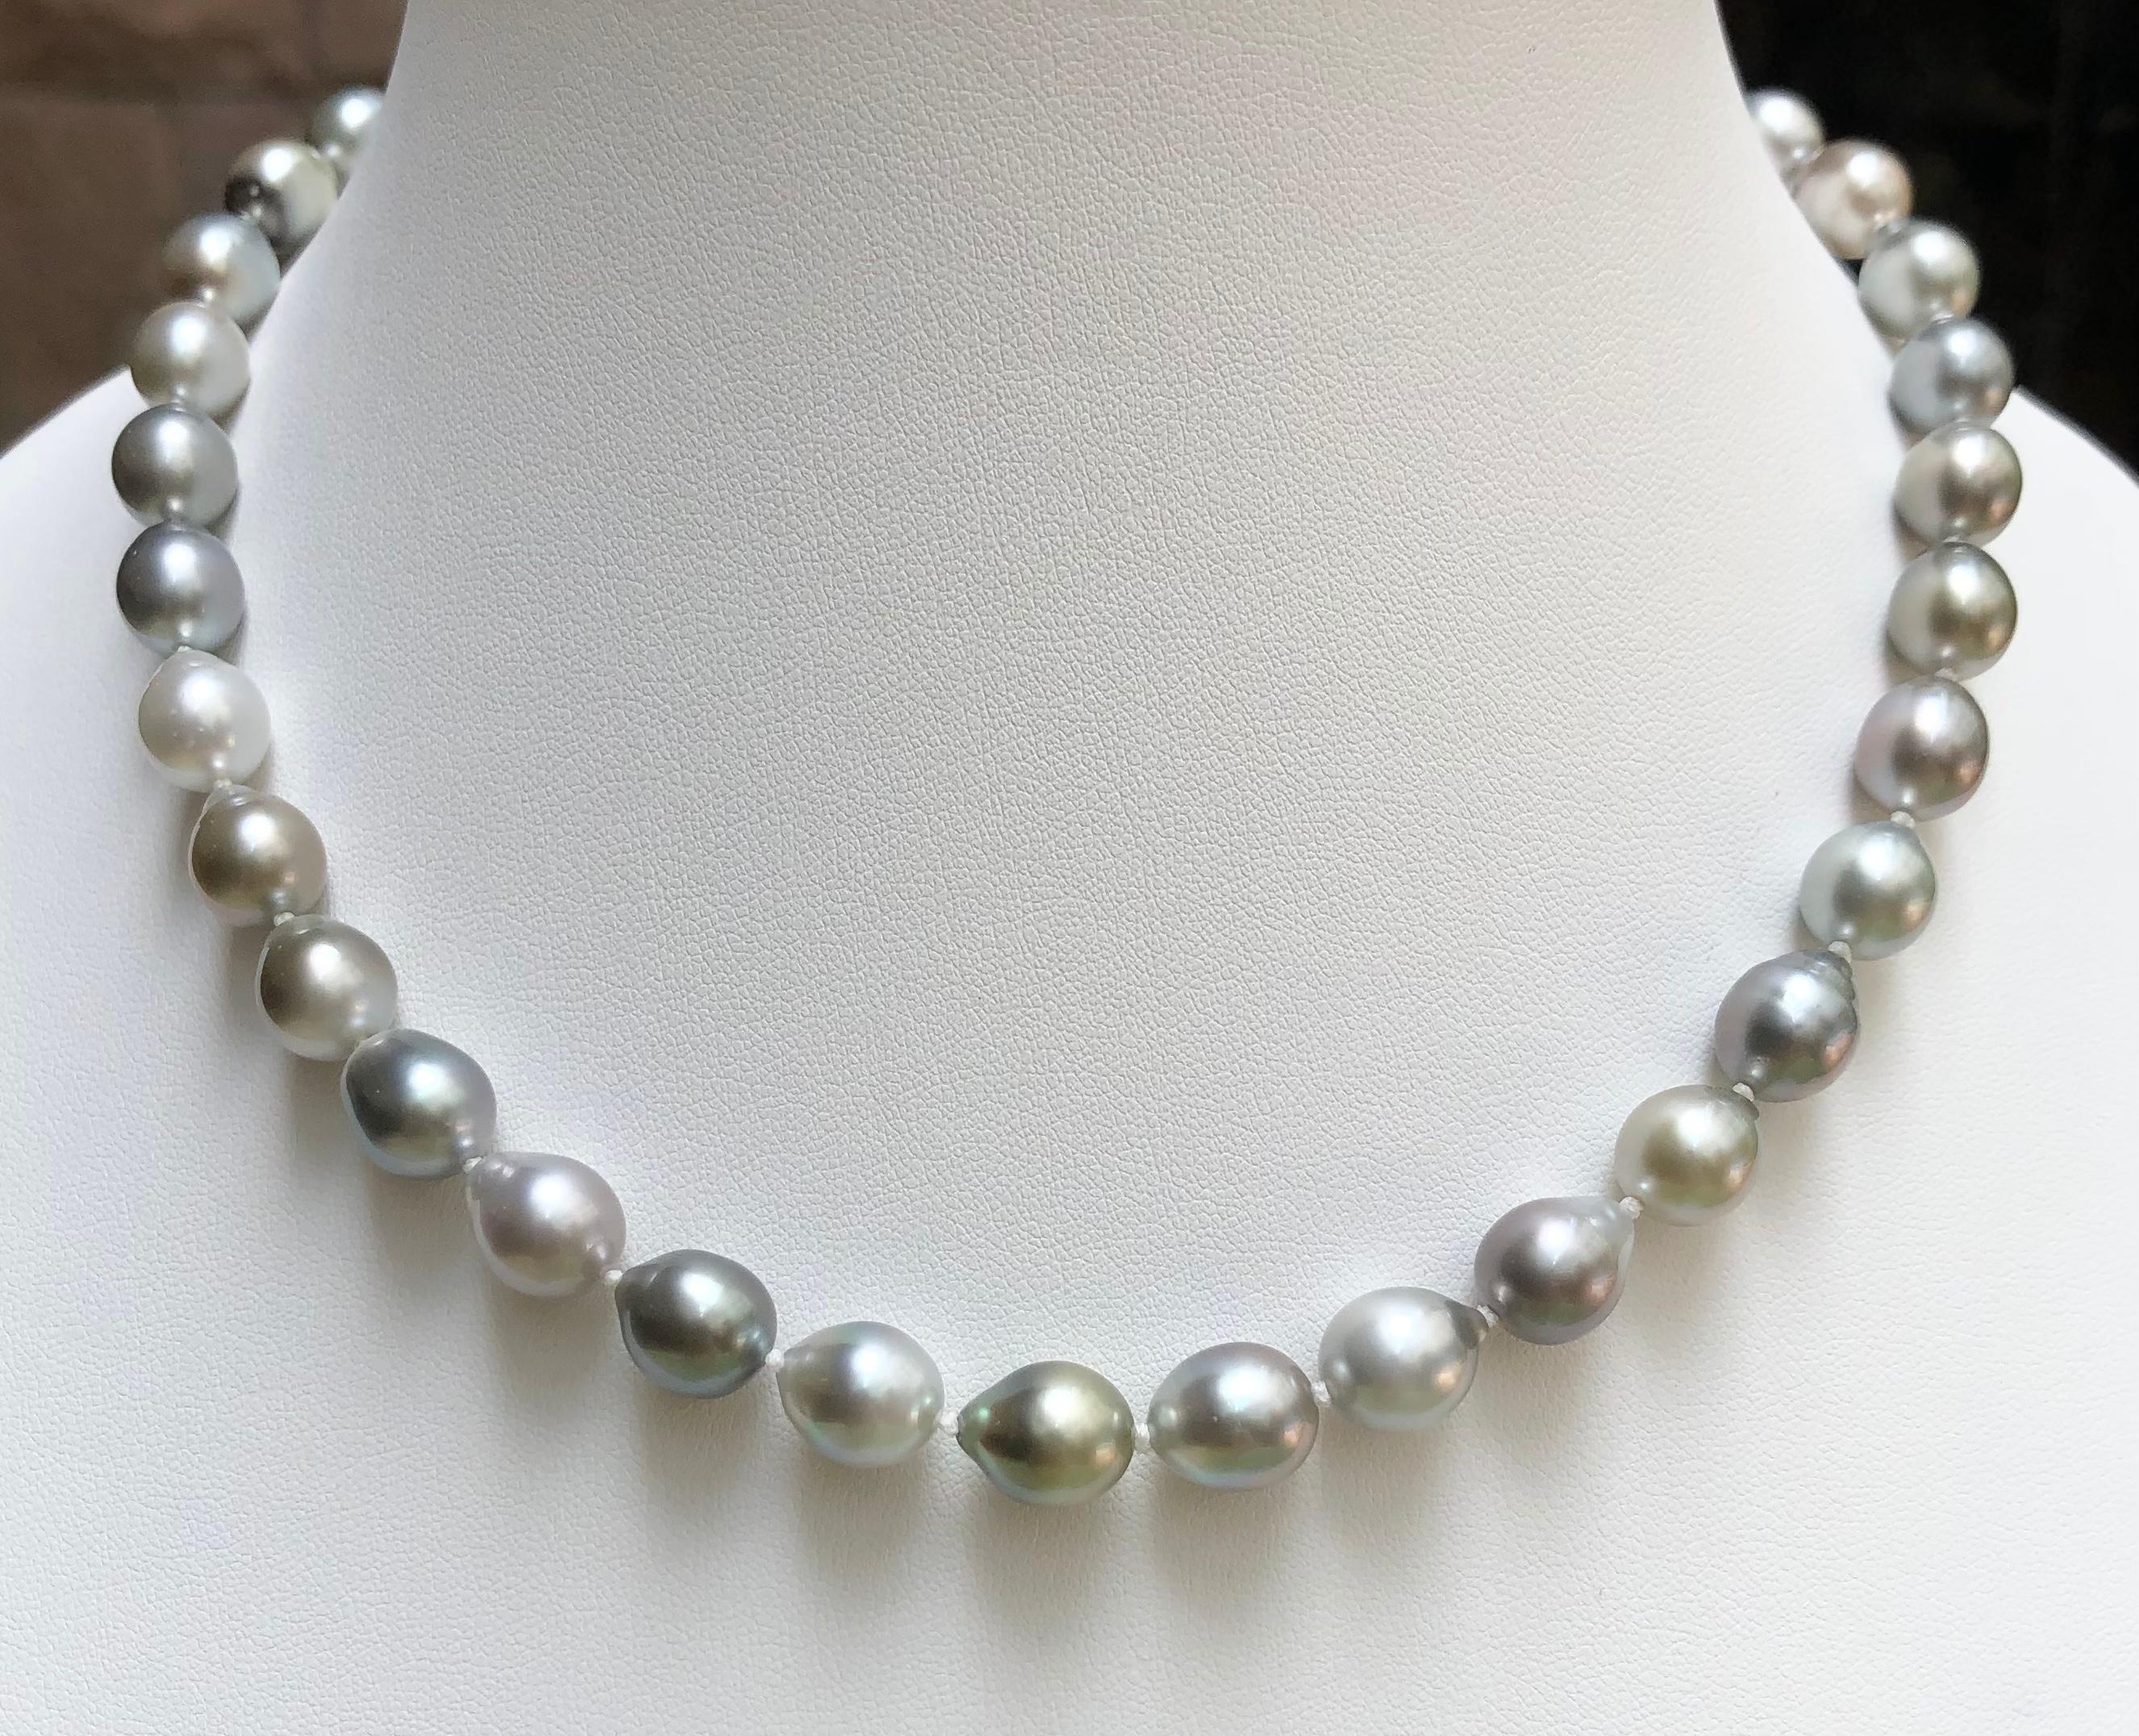 South Sea Pearl with 18 Karat Gold Clasp

Width: 0.9 cm 
Length: 47.0 cm (18.5